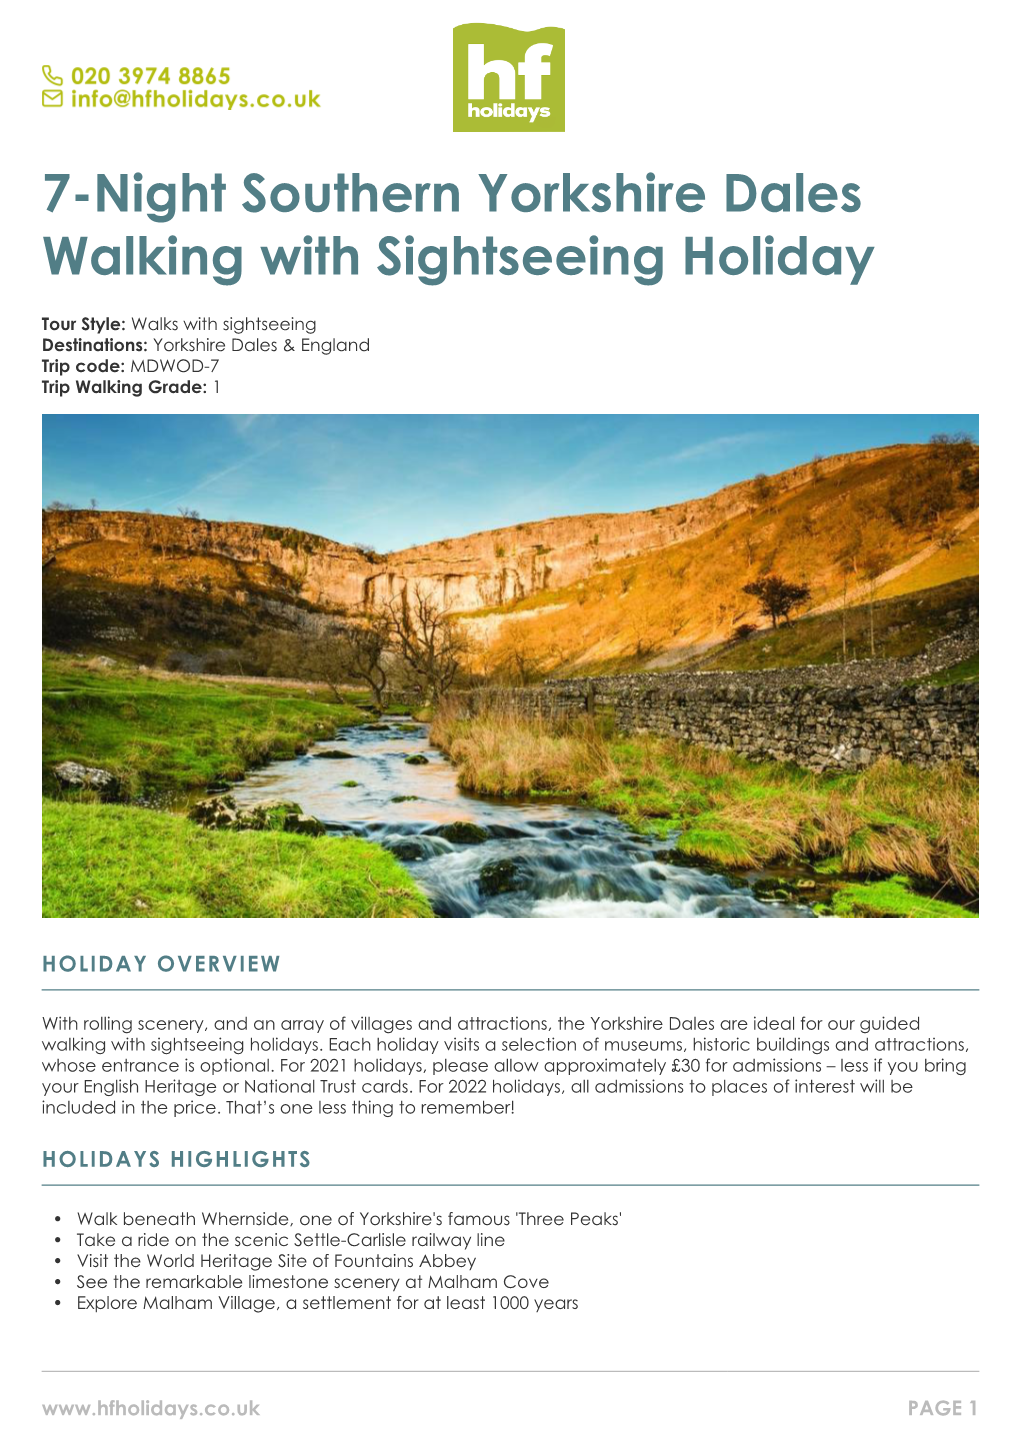 7-Night Southern Yorkshire Dales Walking with Sightseeing Holiday